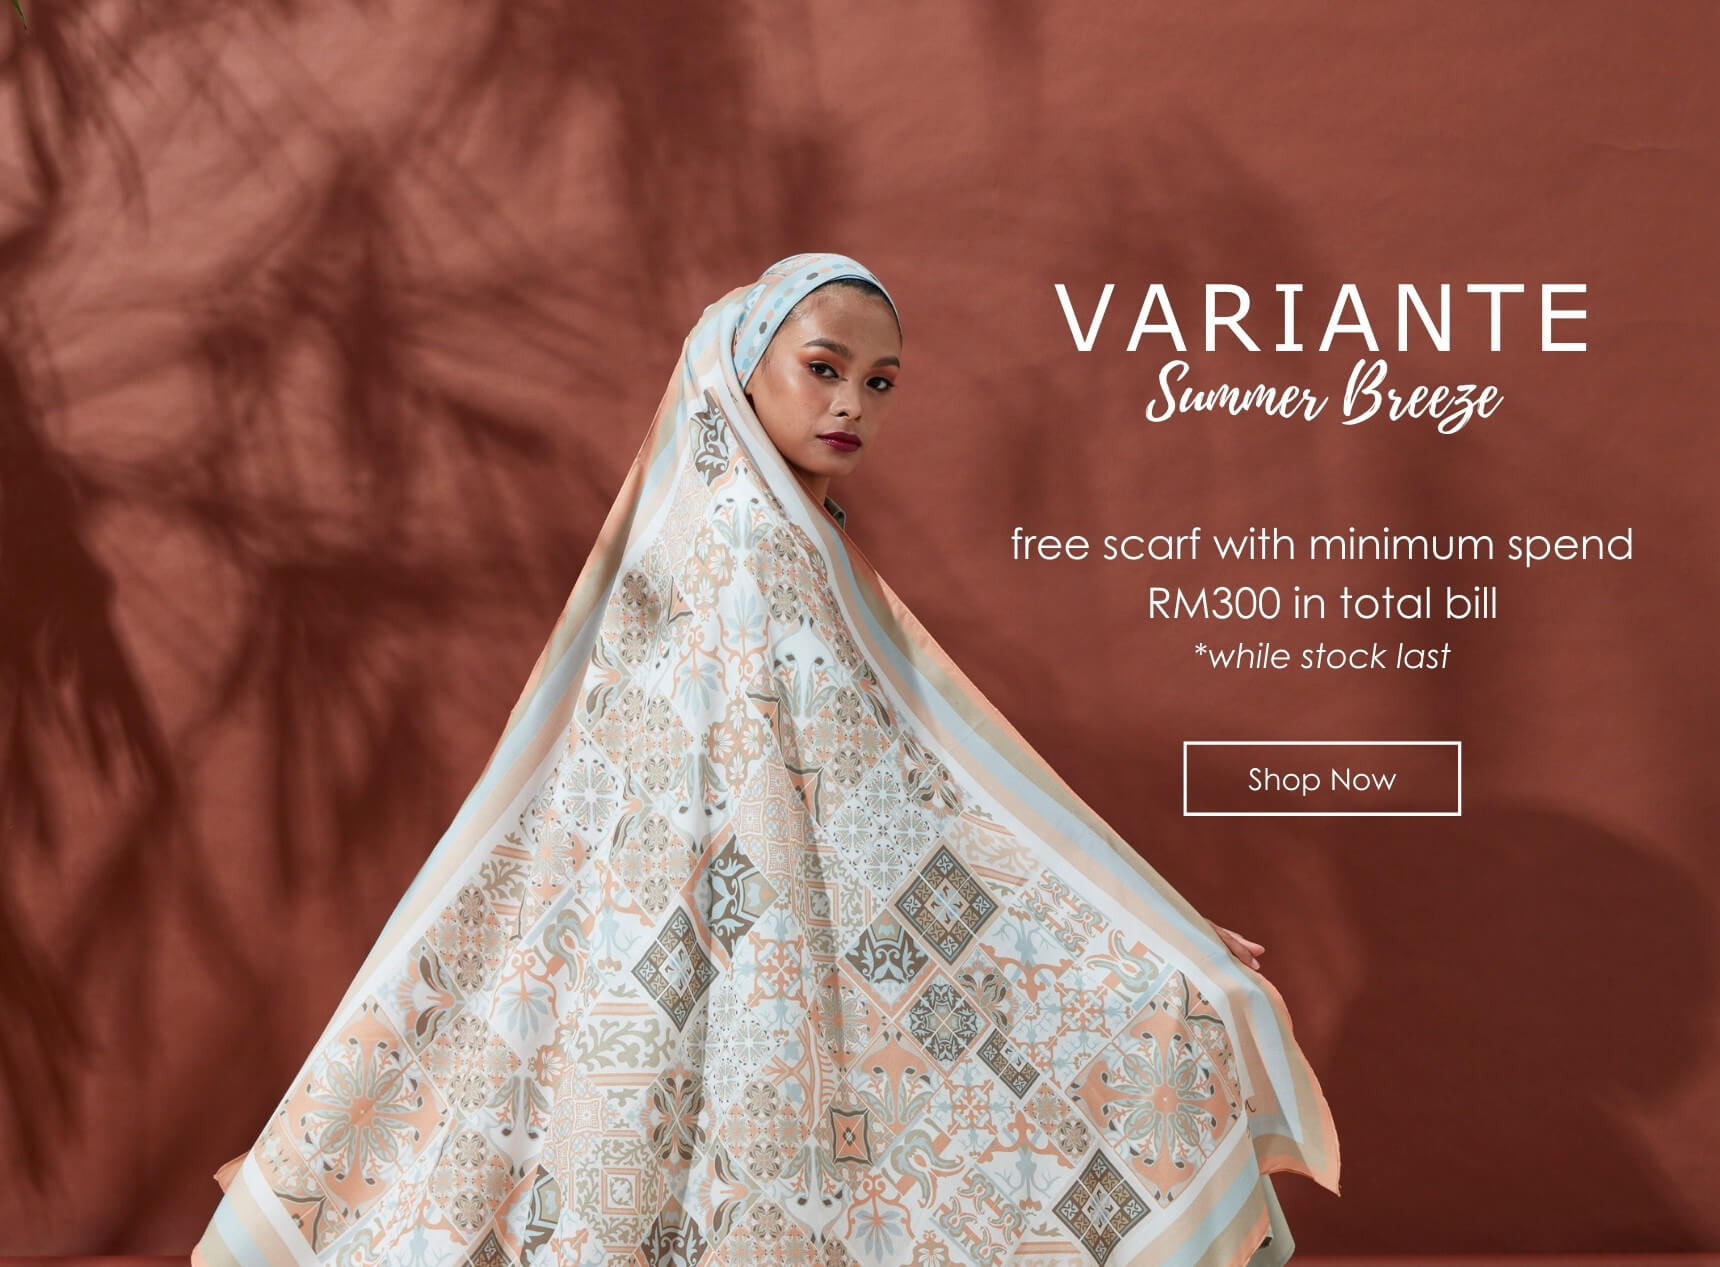 VARIANTE Summer Breeze Free Scarf July 2022